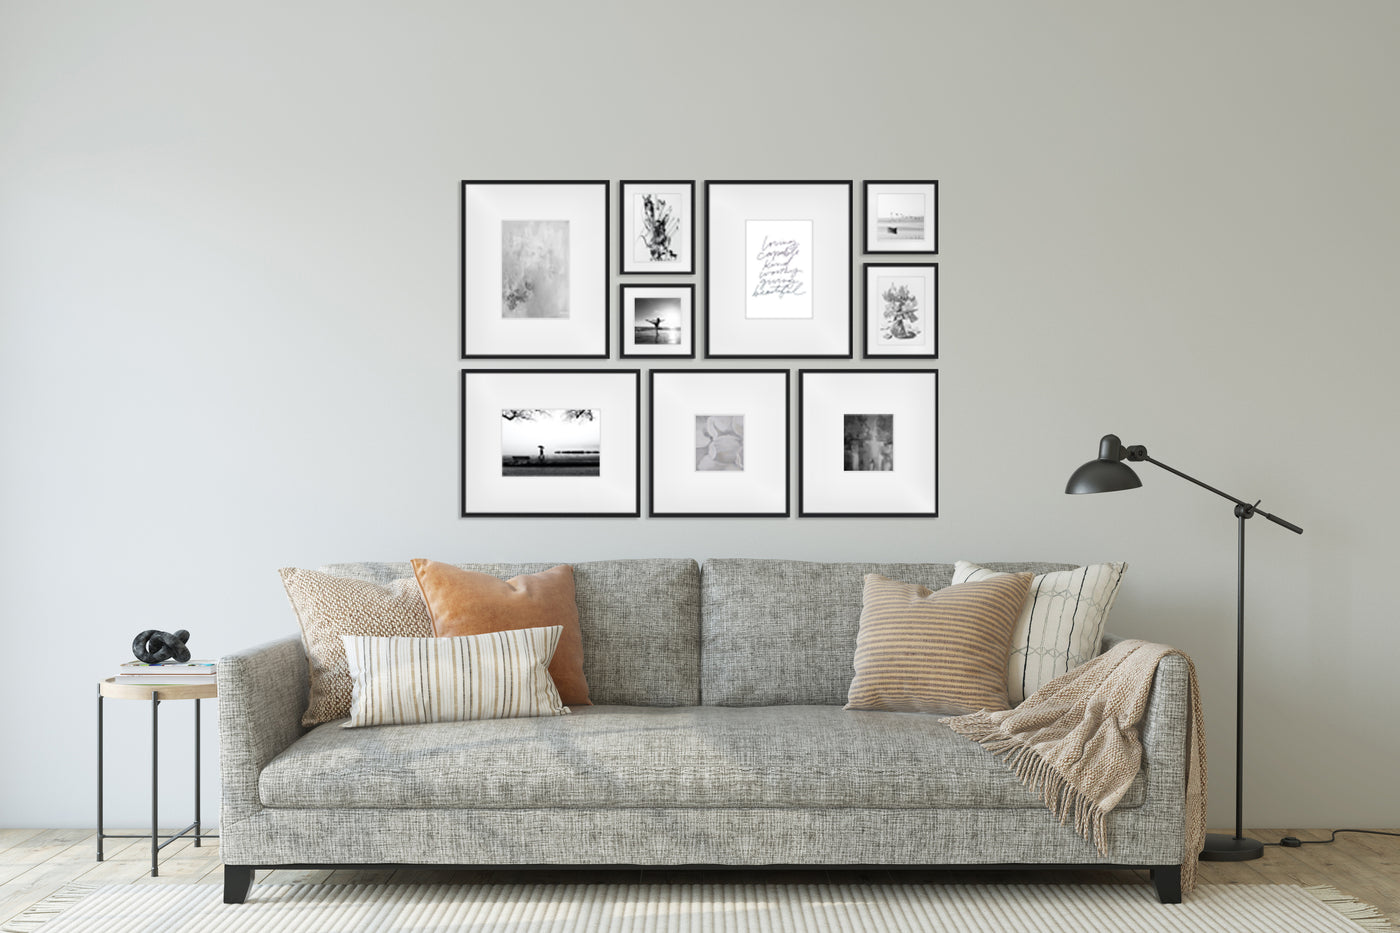 Gallery Walls Made Easy - Gallery Walls Under 4FT Wide